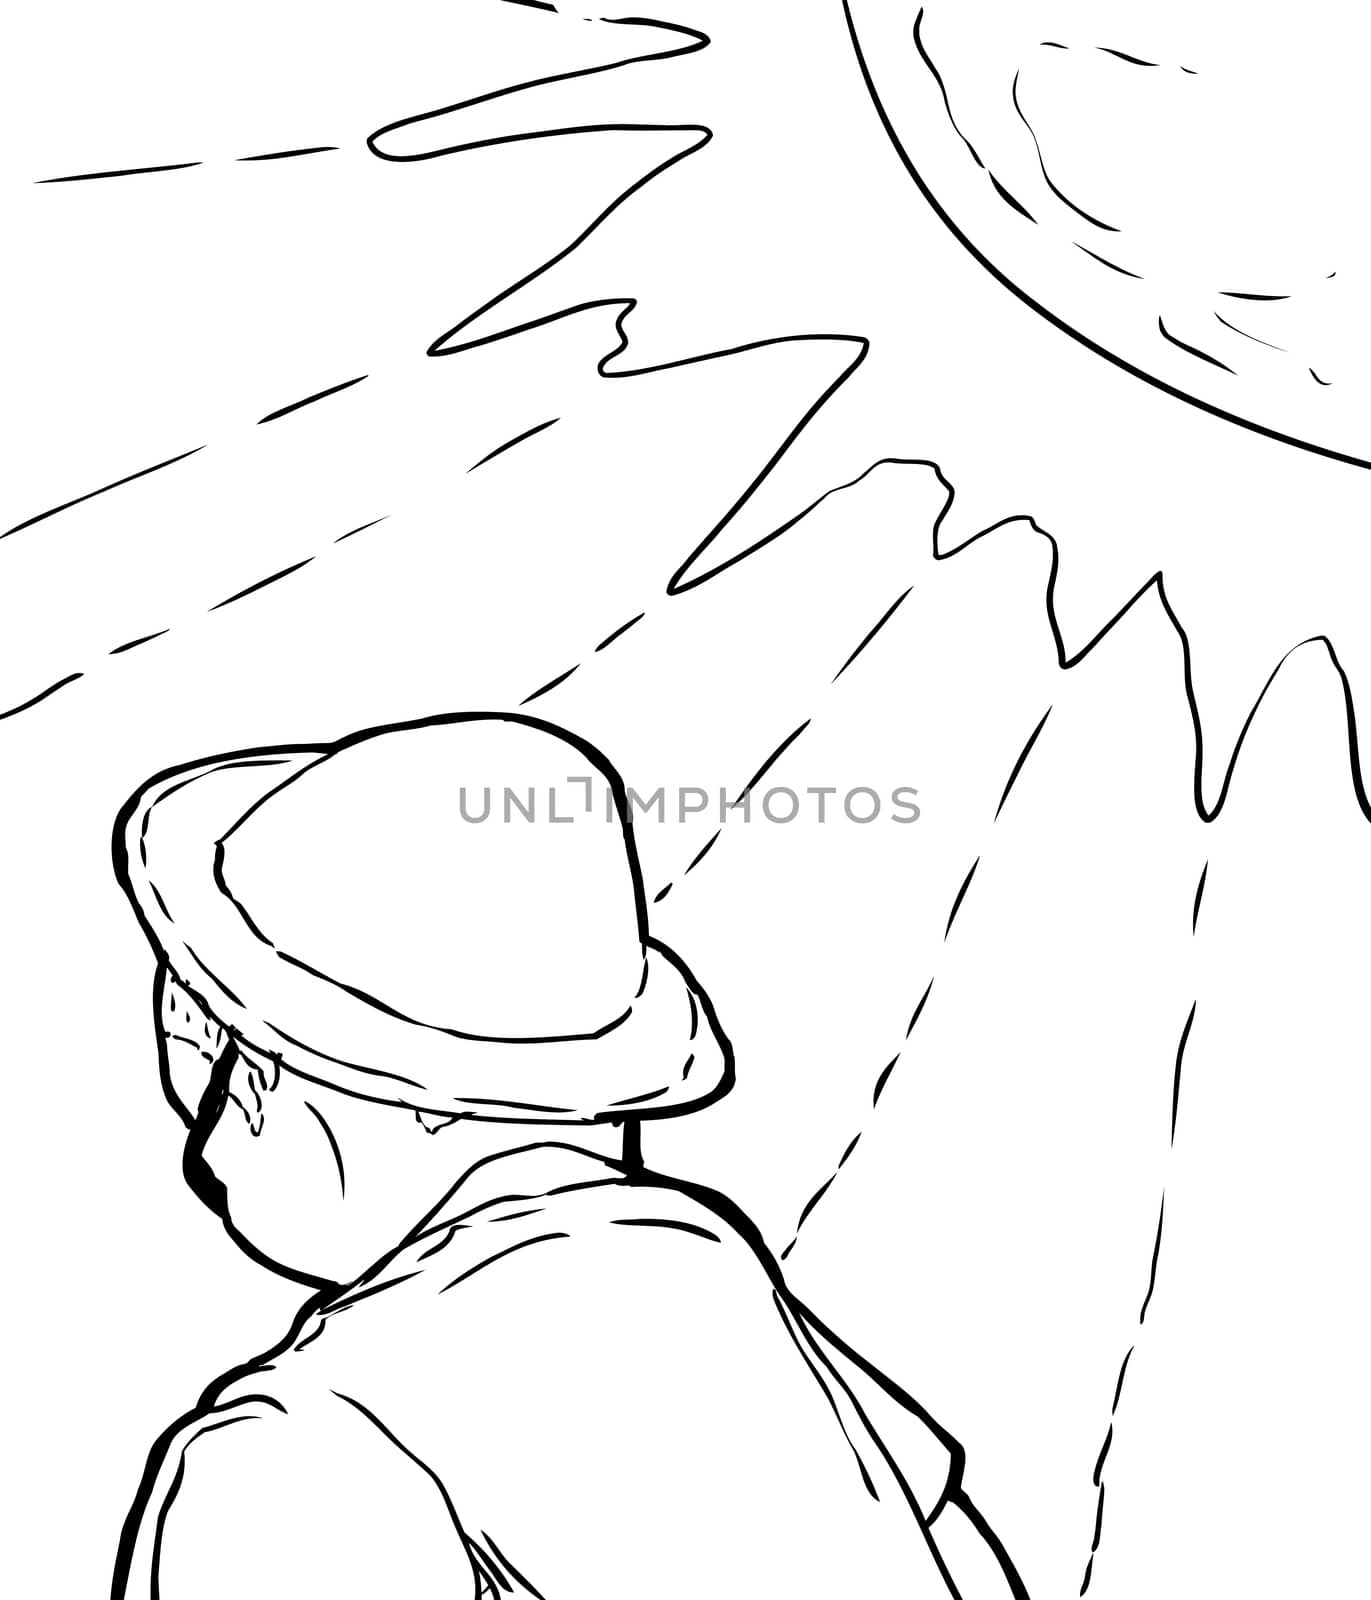 Single outlined man in hat under bright sun rays as cartoon